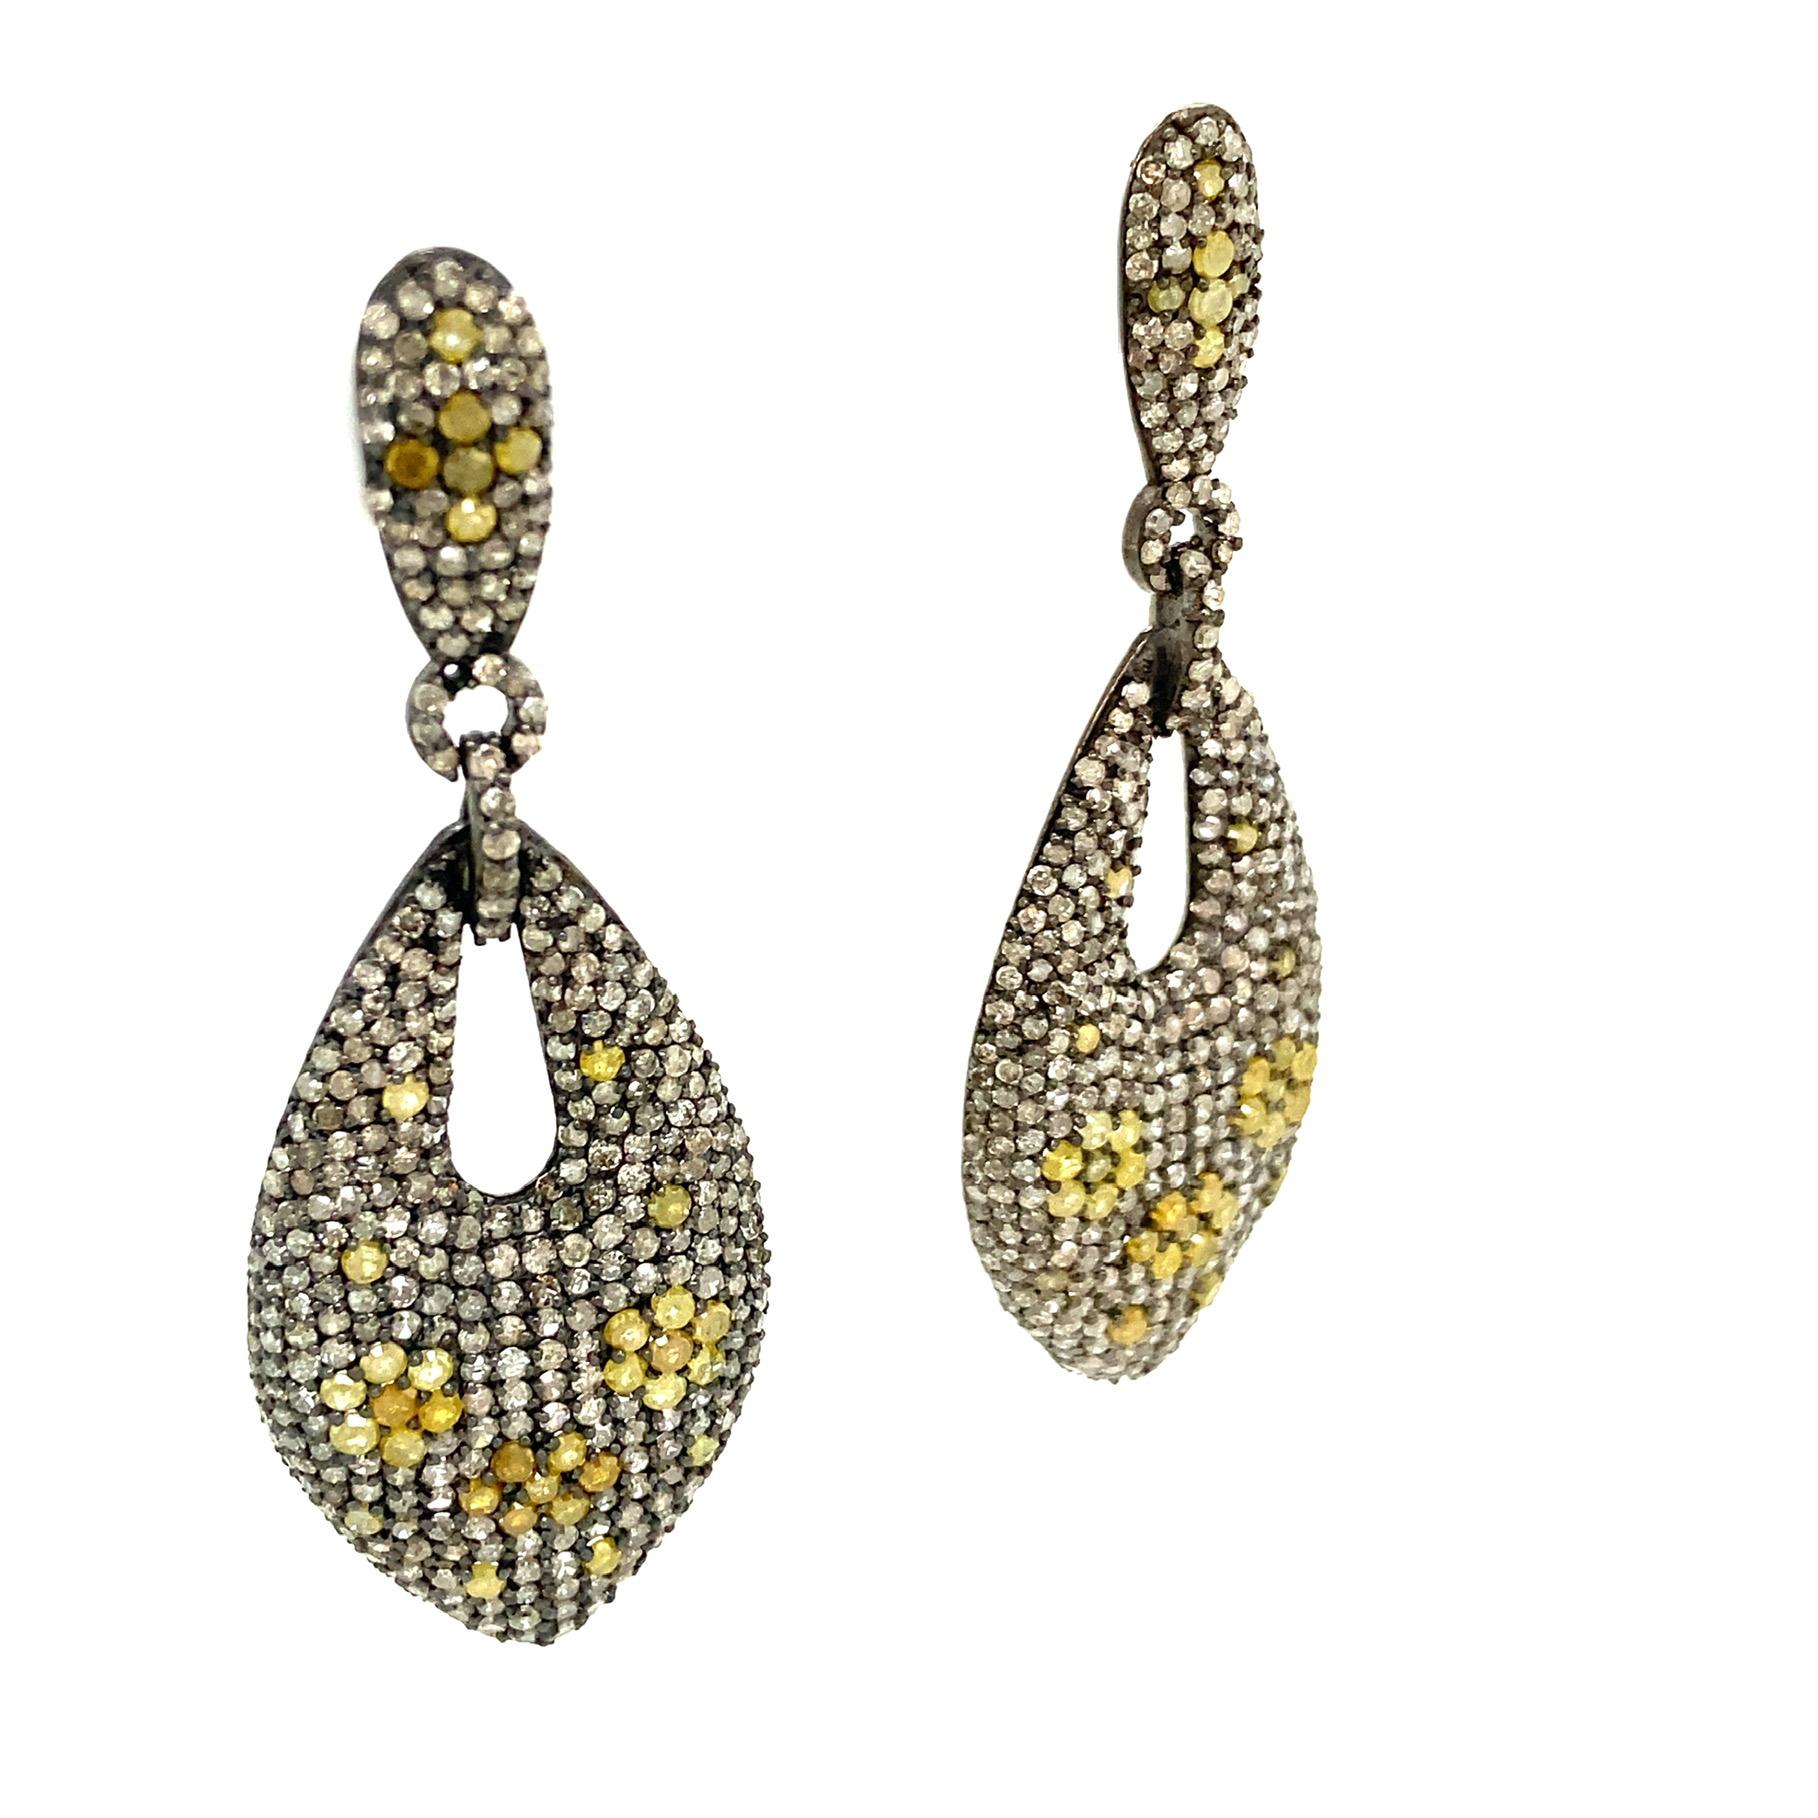 Rustic Collection

Edgy yet feminine drop earrings feature rustic fancy Diamonds, the yellow Diamonds create a flower pattern, set in blackened sterling silver.

Rustic Diamonds: 2.52ct total weight.
